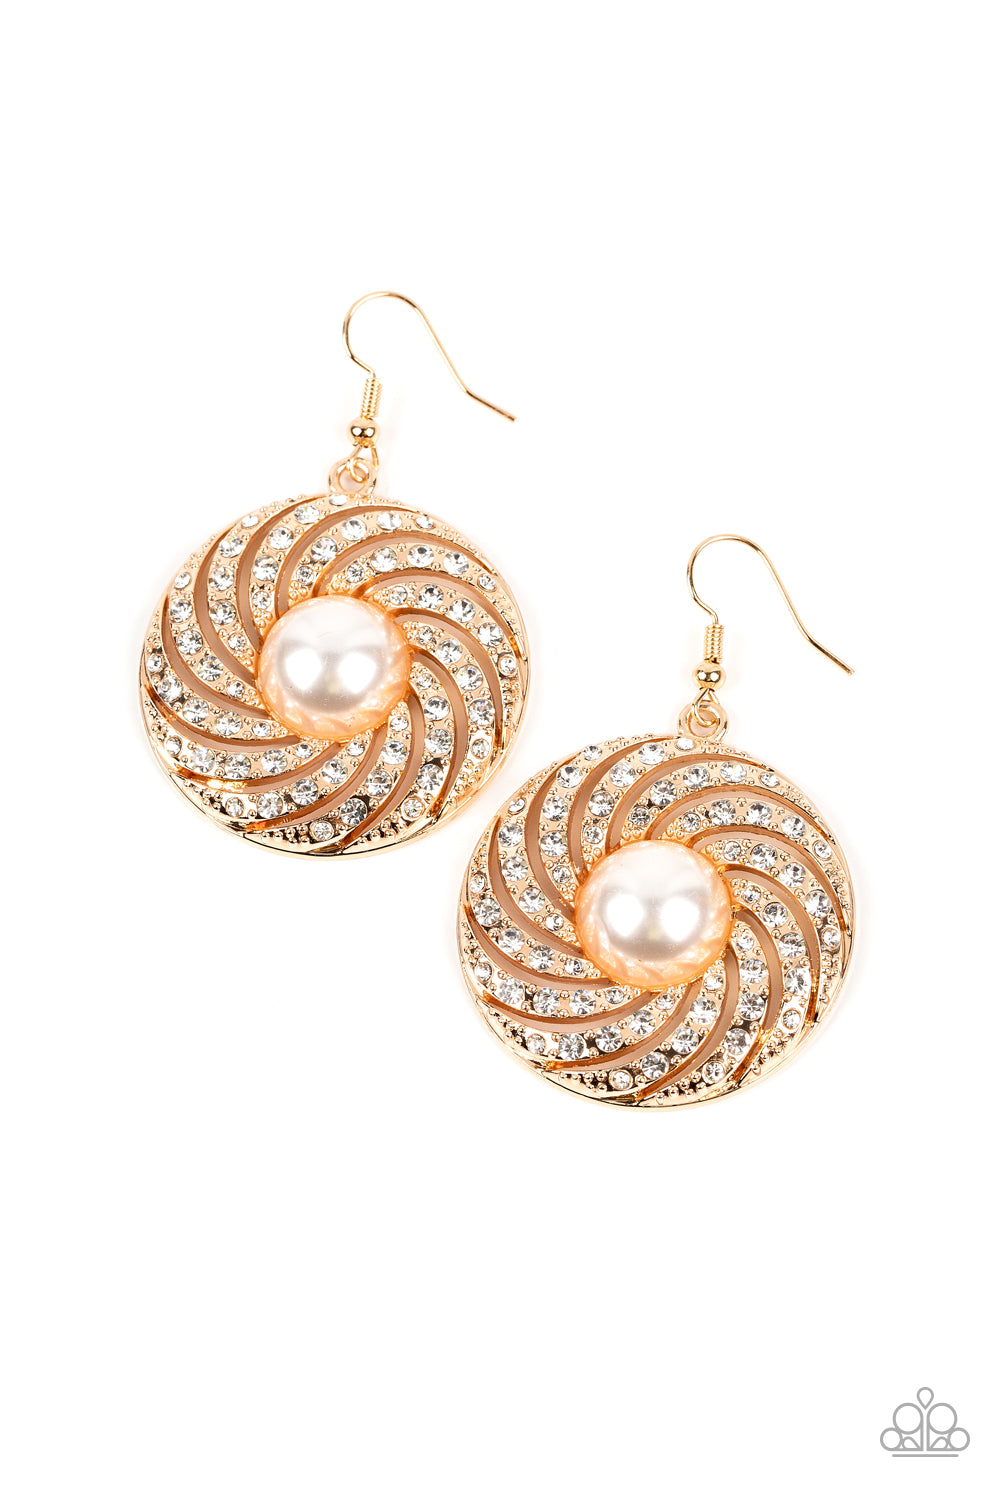 Paparazzi Accessories - Vintage Vortex - Gold Pearl Earrings dotted in dainty gold studs, ribbons of white rhinestones whirl around an oversized pearl center for a hypnotic twinkle. Earring attaches to a standard fishhook fitting.  Sold as one pair of earrings.